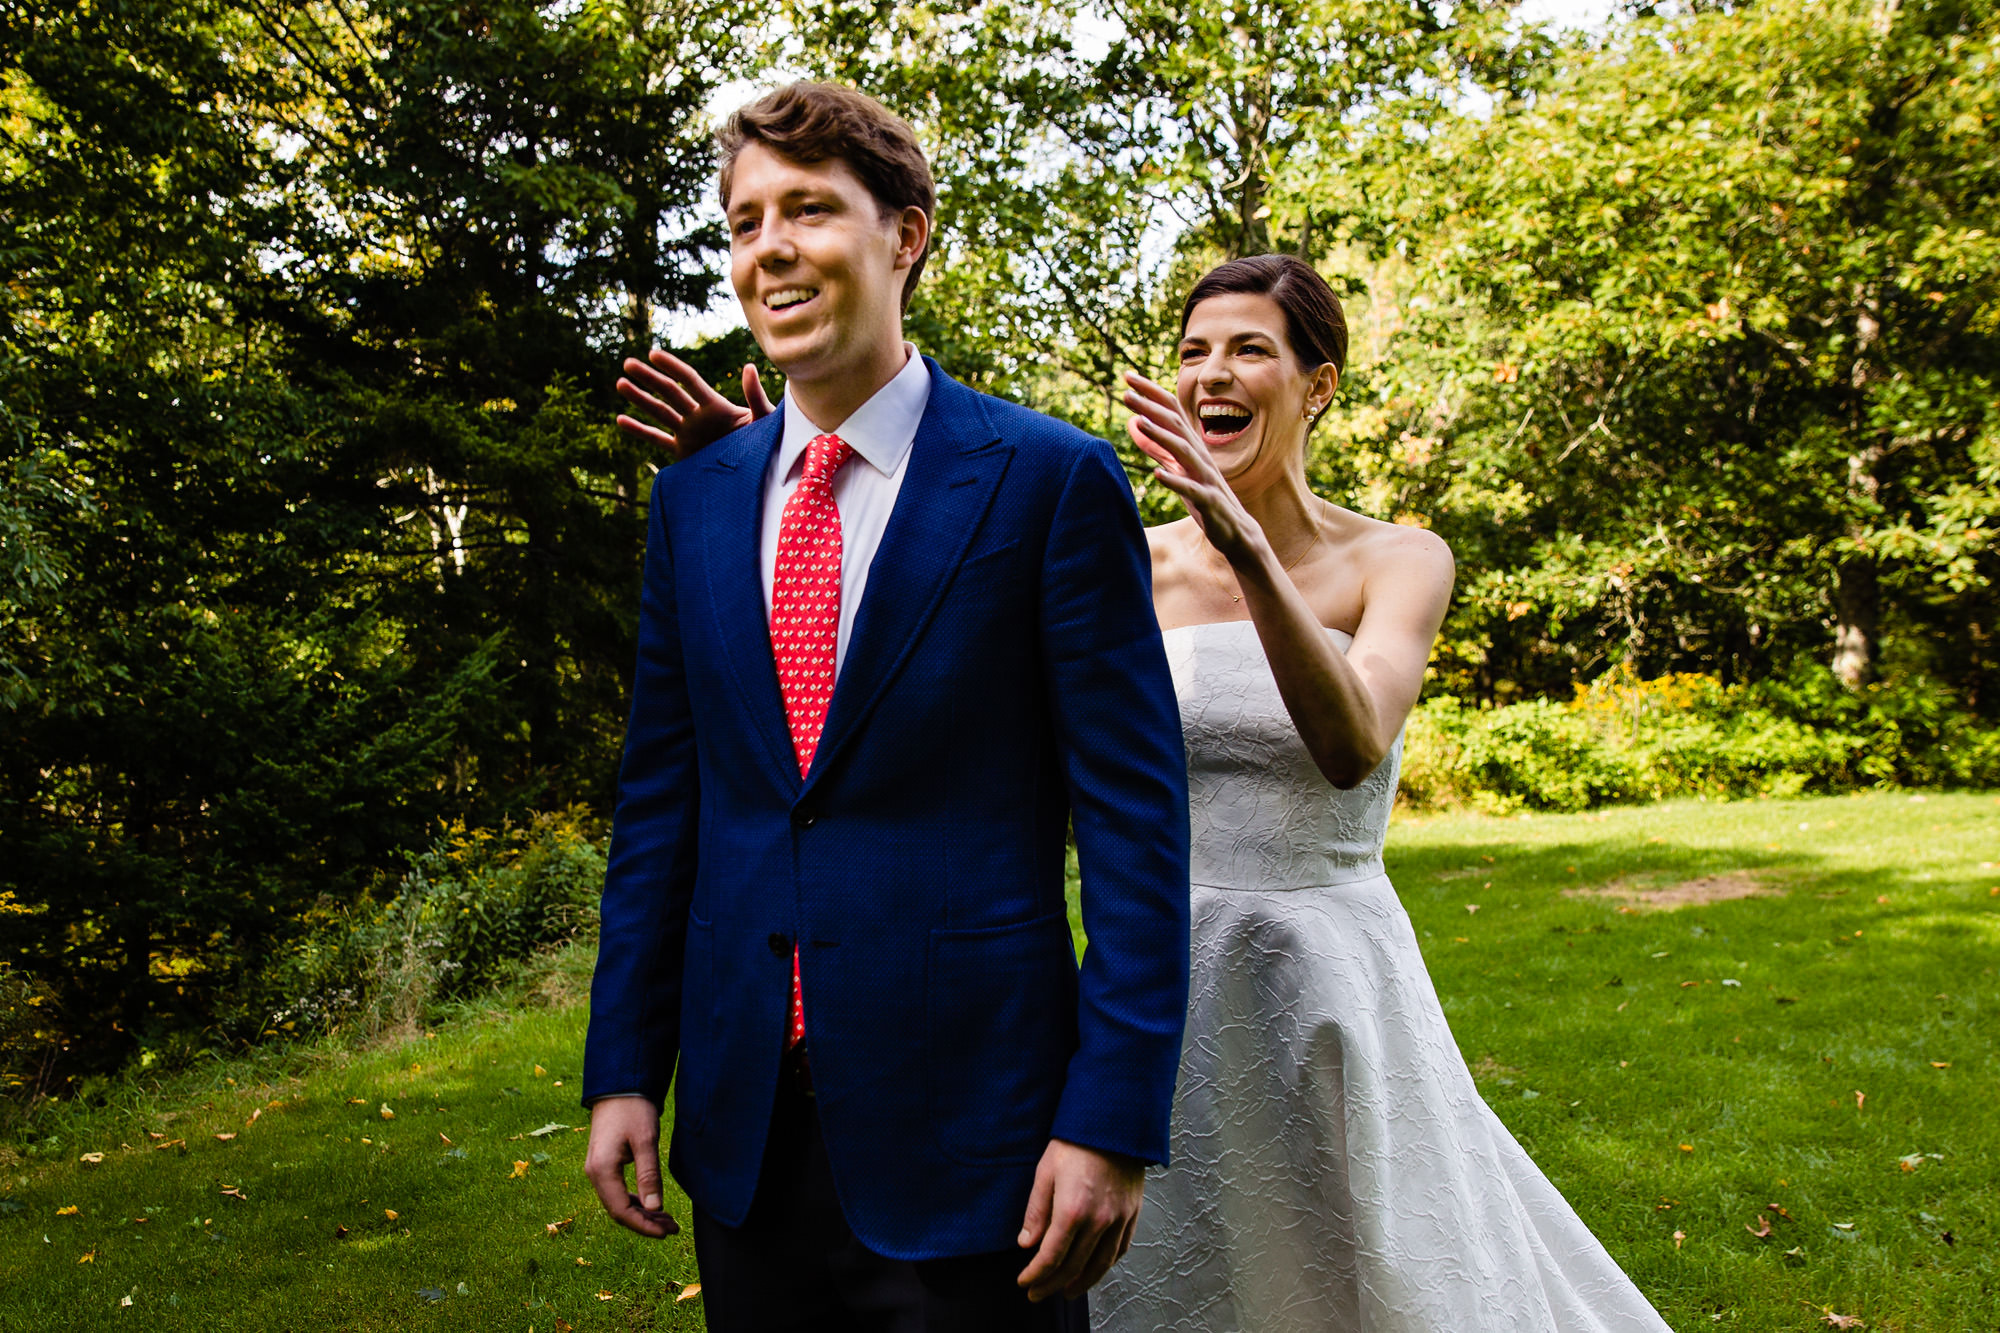 A first look between a bride and a groom at a Maine wedding